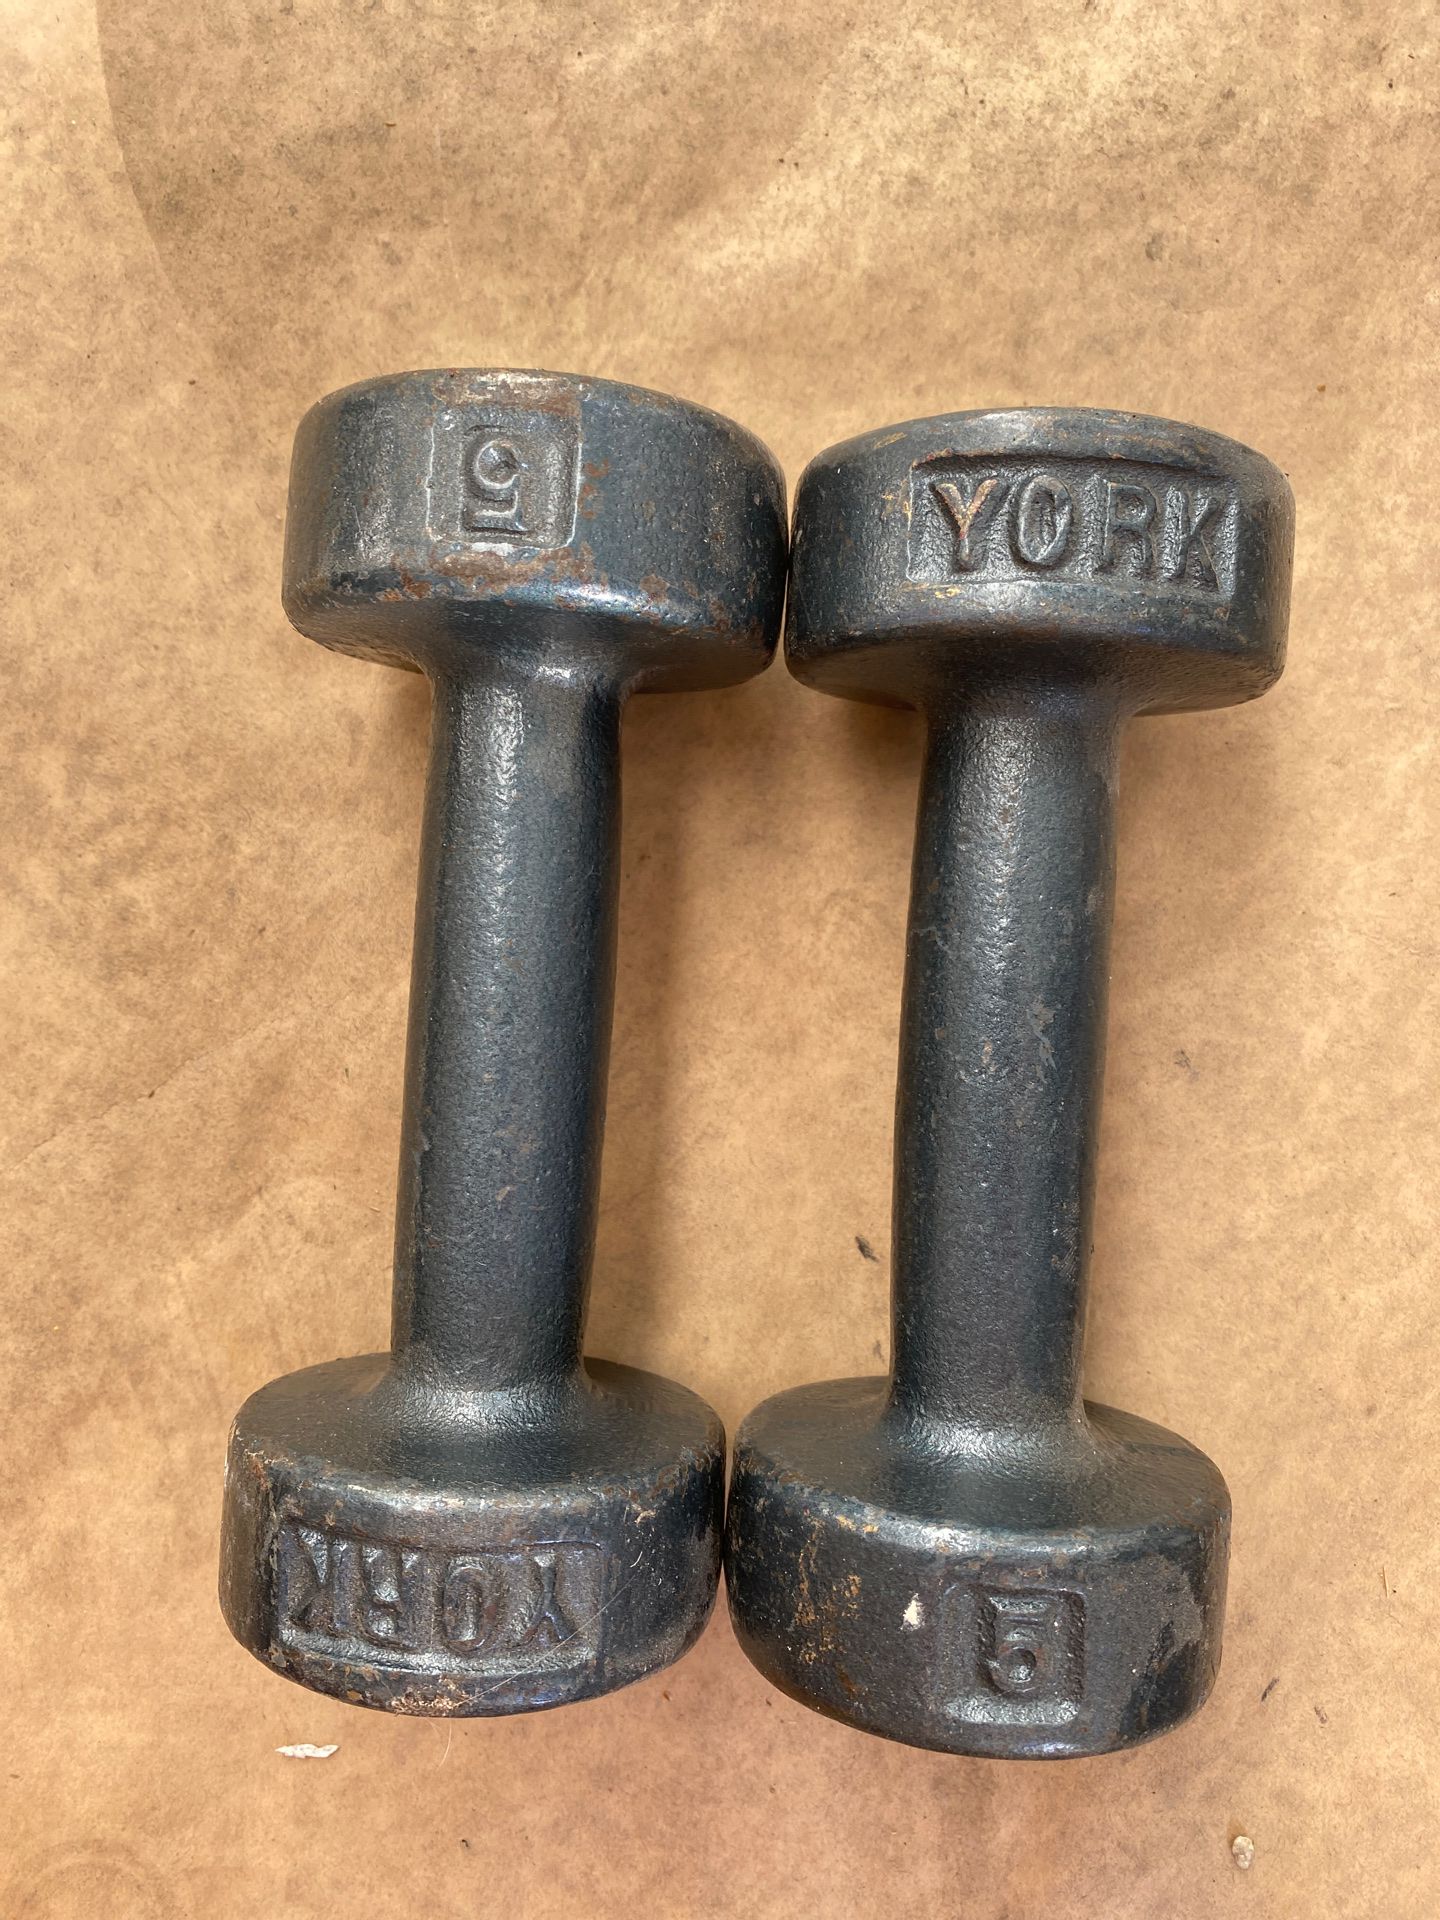 Dumbbell lifting weights 5 pound York